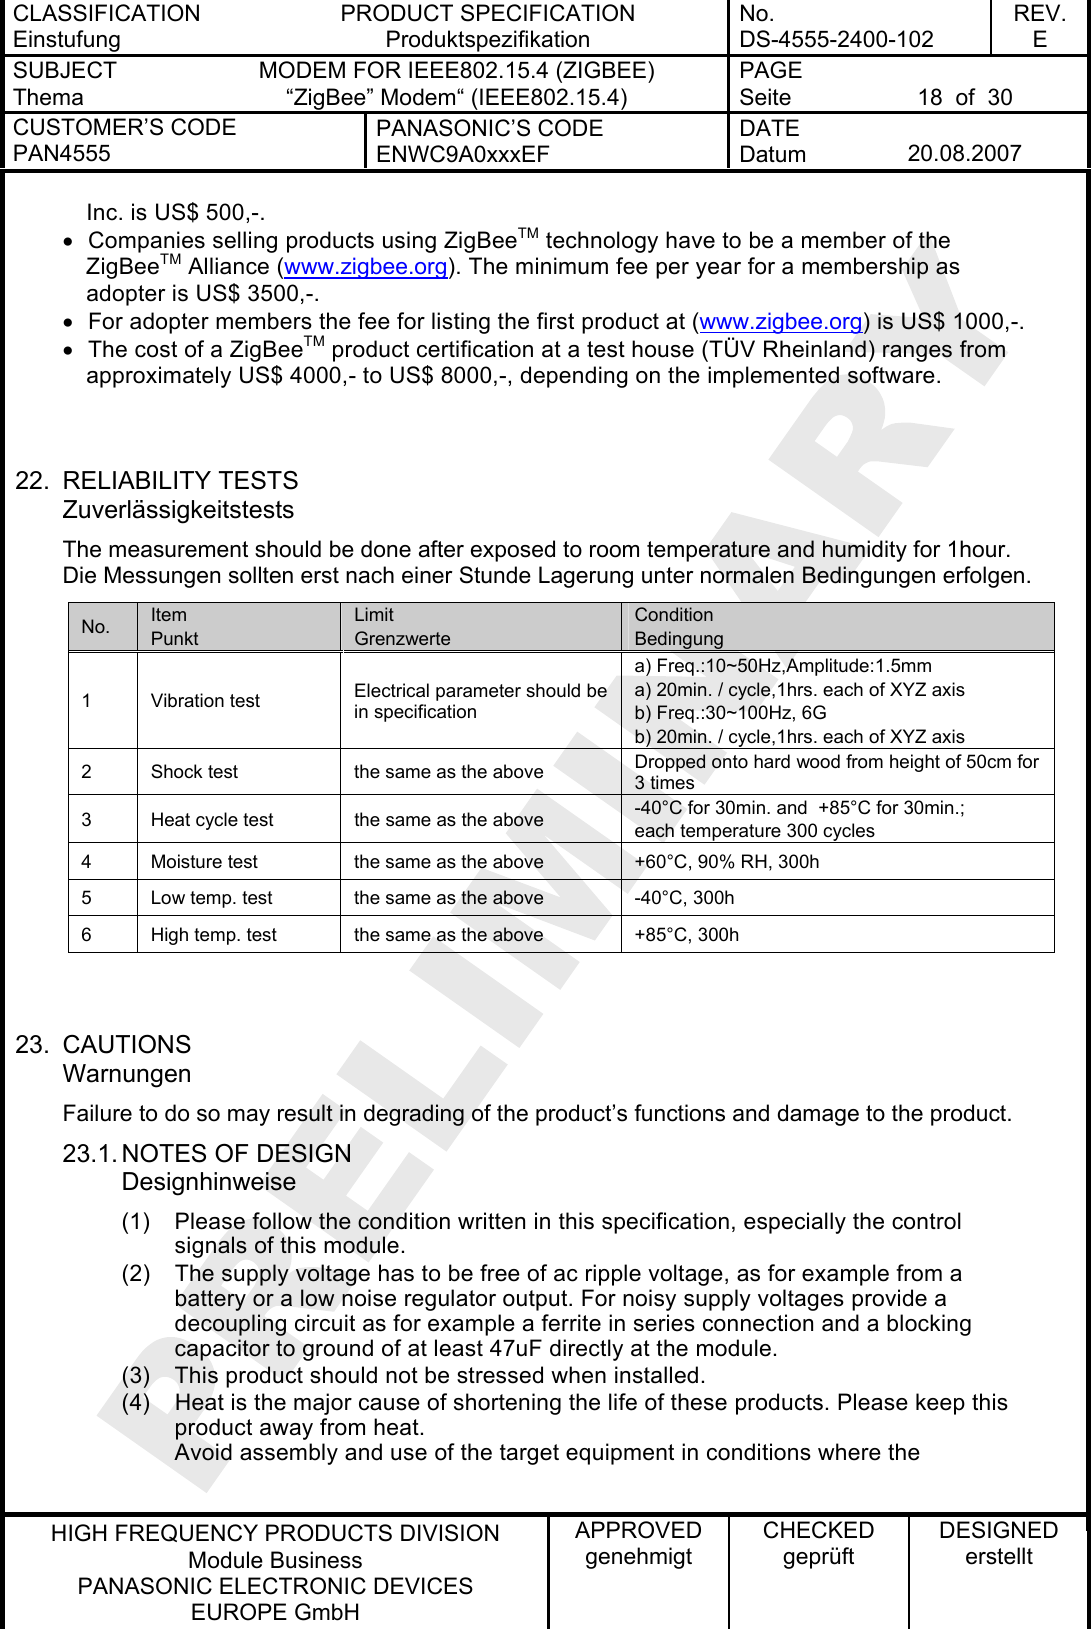 CLASSIFICATION Einstufung PRODUCT SPECIFICATION Produktspezifikation No. DS-4555-2400-102 REV. E SUBJECT Thema MODEM FOR IEEE802.15.4 (ZIGBEE) “ZigBee” Modem“ (IEEE802.15.4) PAGE Seite  18  of  30 CUSTOMER’S CODE PAN4555 PANASONIC’S CODE ENWC9A0xxxEF DATE Datum  20.08.2007   HIGH FREQUENCY PRODUCTS DIVISION Module Business PANASONIC ELECTRONIC DEVICES  EUROPE GmbH APPROVED genehmigt CHECKED geprüft DESIGNED erstellt Inc. is US$ 500,-. •  Companies selling products using ZigBeeTM technology have to be a member of the ZigBeeTM Alliance (www.zigbee.org). The minimum fee per year for a membership as adopter is US$ 3500,-. •  For adopter members the fee for listing the first product at (www.zigbee.org) is US$ 1000,-. •  The cost of a ZigBeeTM product certification at a test house (TÜV Rheinland) ranges from approximately US$ 4000,- to US$ 8000,-, depending on the implemented software.   22. RELIABILITY TESTS Zuverlässigkeitstests The measurement should be done after exposed to room temperature and humidity for 1hour. Die Messungen sollten erst nach einer Stunde Lagerung unter normalen Bedingungen erfolgen. No.  Item Punkt Limit Grenzwerte Condition Bedingung 1 Vibration test  Electrical parameter should be in specification a) Freq.:10~50Hz,Amplitude:1.5mm a) 20min. / cycle,1hrs. each of XYZ axis b) Freq.:30~100Hz, 6G b) 20min. / cycle,1hrs. each of XYZ axis 2  Shock test  the same as the above  Dropped onto hard wood from height of 50cm for 3 times 3  Heat cycle test  the same as the above  -40°C for 30min. and  +85°C for 30min.;  each temperature 300 cycles 4  Moisture test  the same as the above  +60°C, 90% RH, 300h 5  Low temp. test  the same as the above  -40°C, 300h 6  High temp. test  the same as the above  +85°C, 300h   23. CAUTIONS Warnungen Failure to do so may result in degrading of the product’s functions and damage to the product. 23.1. NOTES OF DESIGN Designhinweise (1)  Please follow the condition written in this specification, especially the control signals of this module. (2)  The supply voltage has to be free of ac ripple voltage, as for example from a battery or a low noise regulator output. For noisy supply voltages provide a decoupling circuit as for example a ferrite in series connection and a blocking capacitor to ground of at least 47uF directly at the module. (3)  This product should not be stressed when installed. (4)  Heat is the major cause of shortening the life of these products. Please keep this product away from heat. Avoid assembly and use of the target equipment in conditions where the  